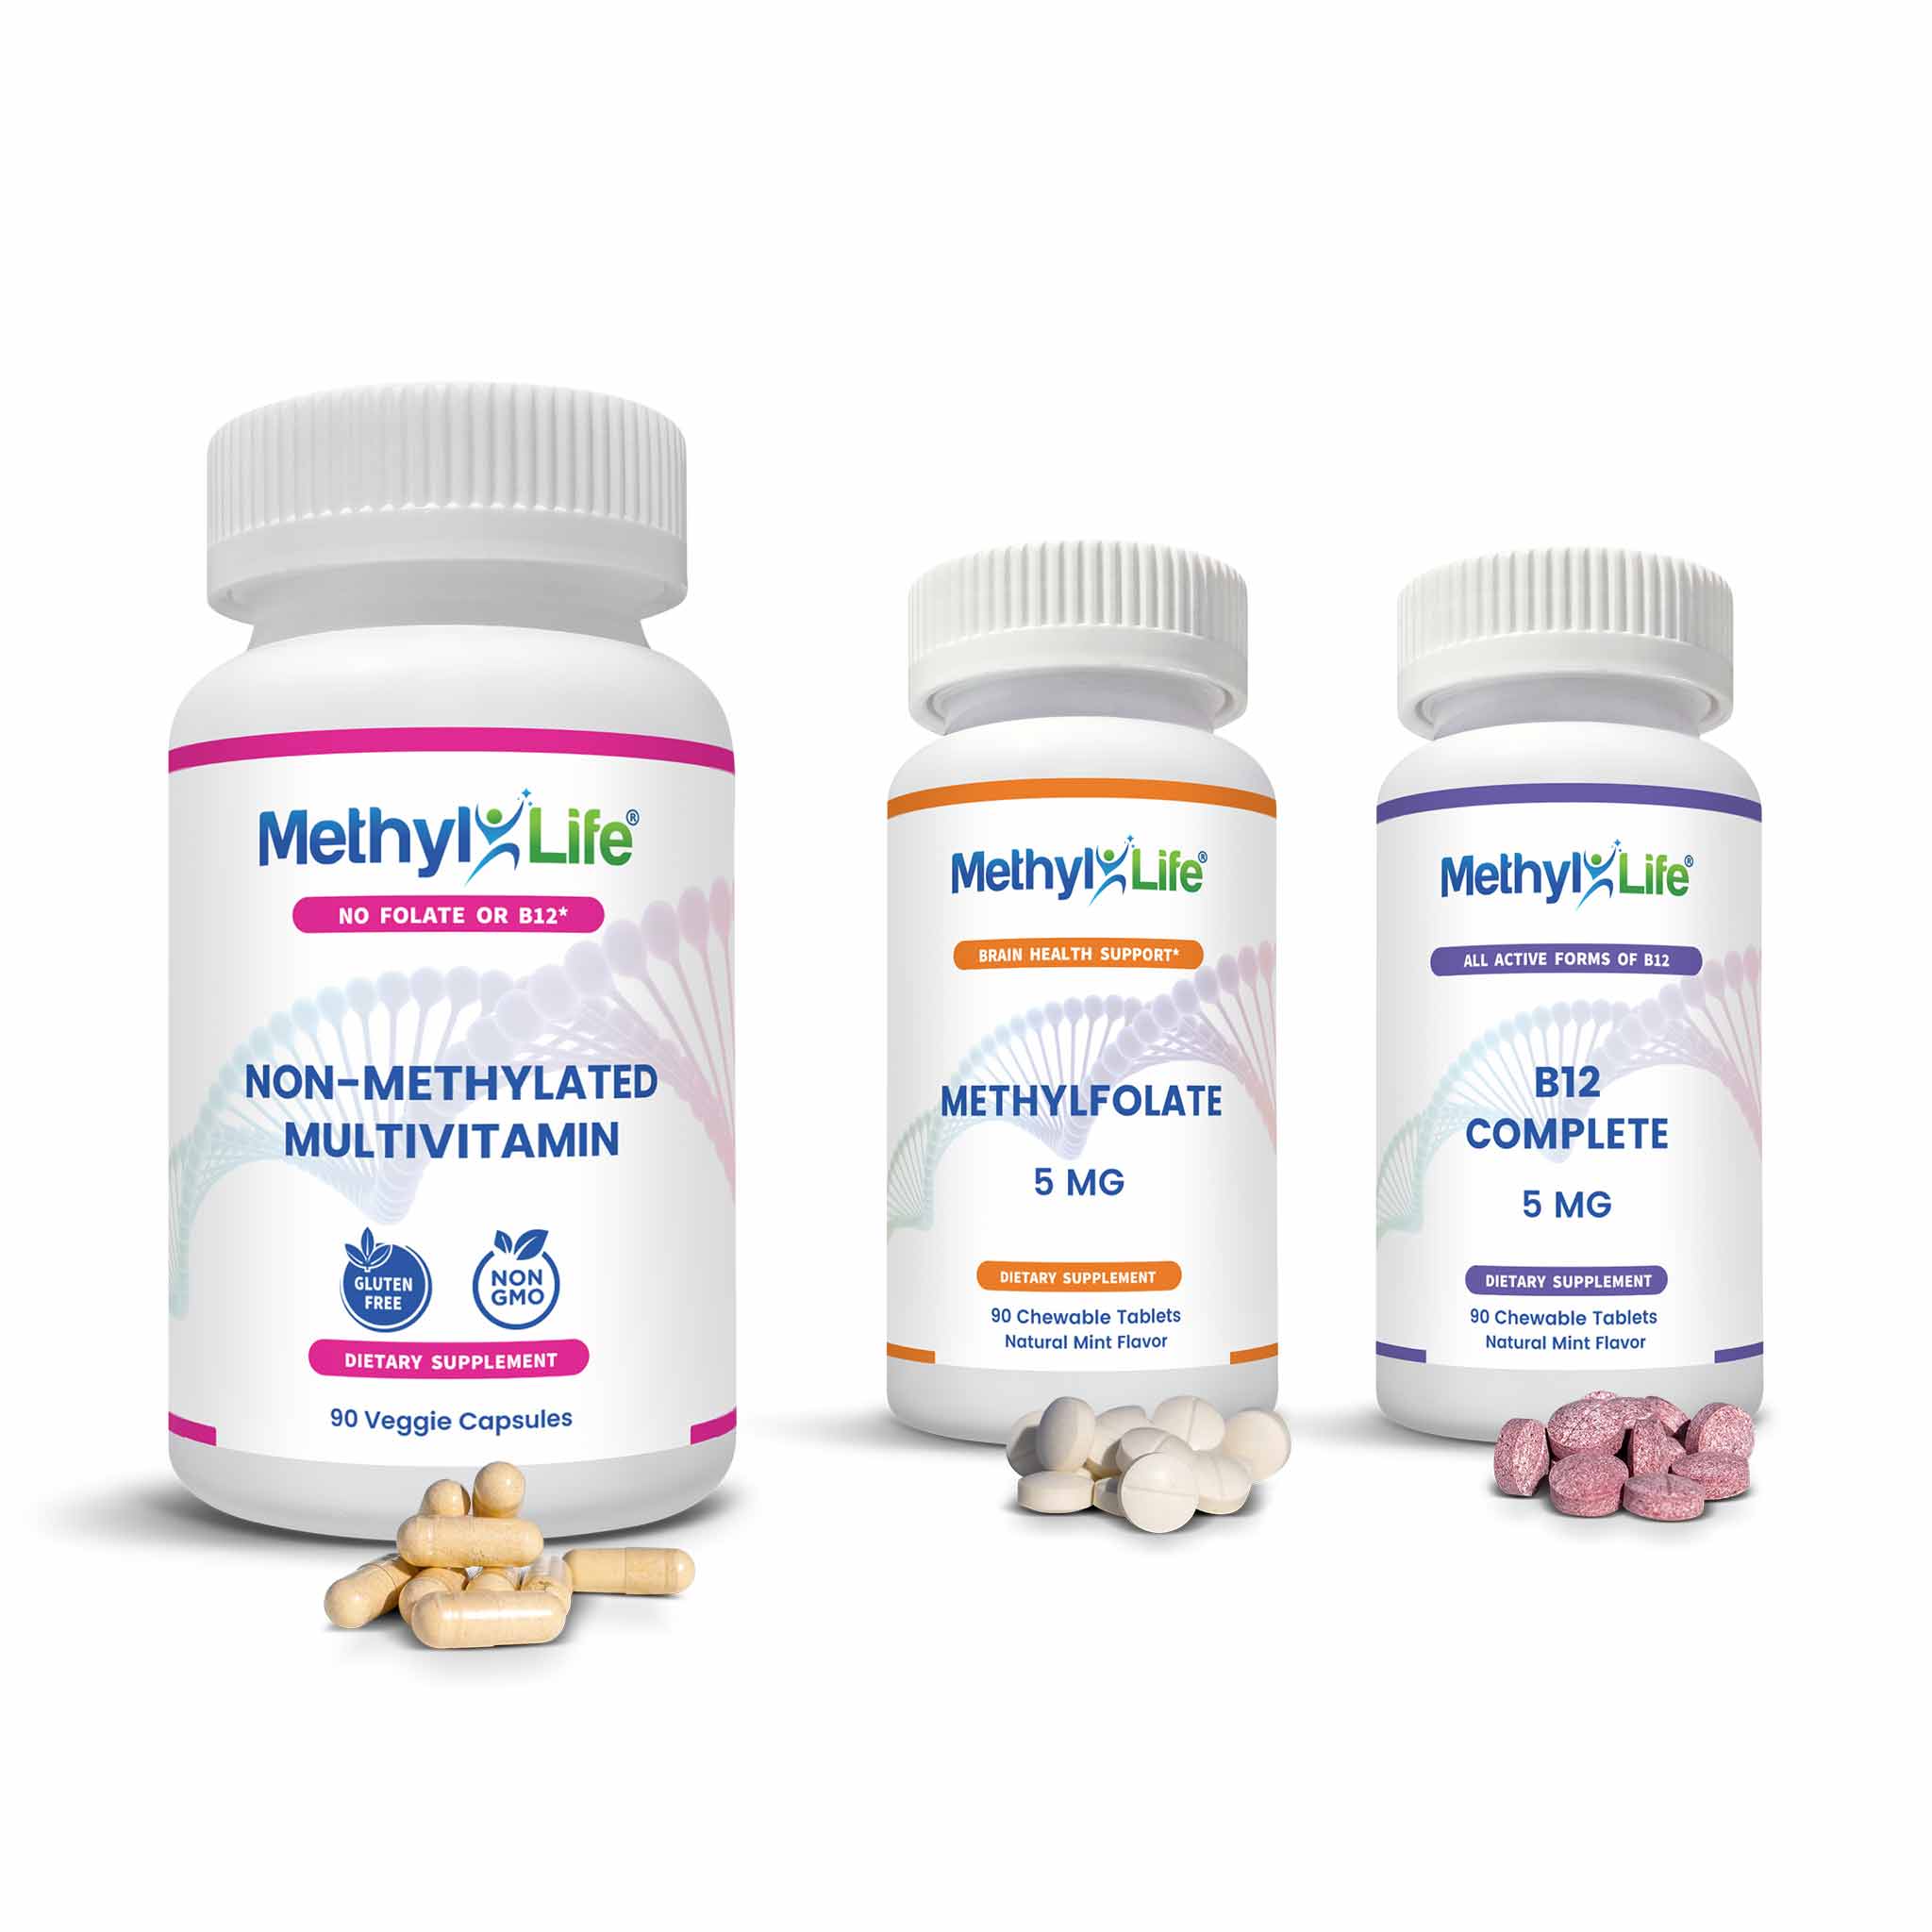 Cognitive Health Bundle (3 product bottles + caps/tabs) - L-Methylfolate 5 mg + Active B12 Complete 5 mg + Non-Methylated Multi - Methyl-Life